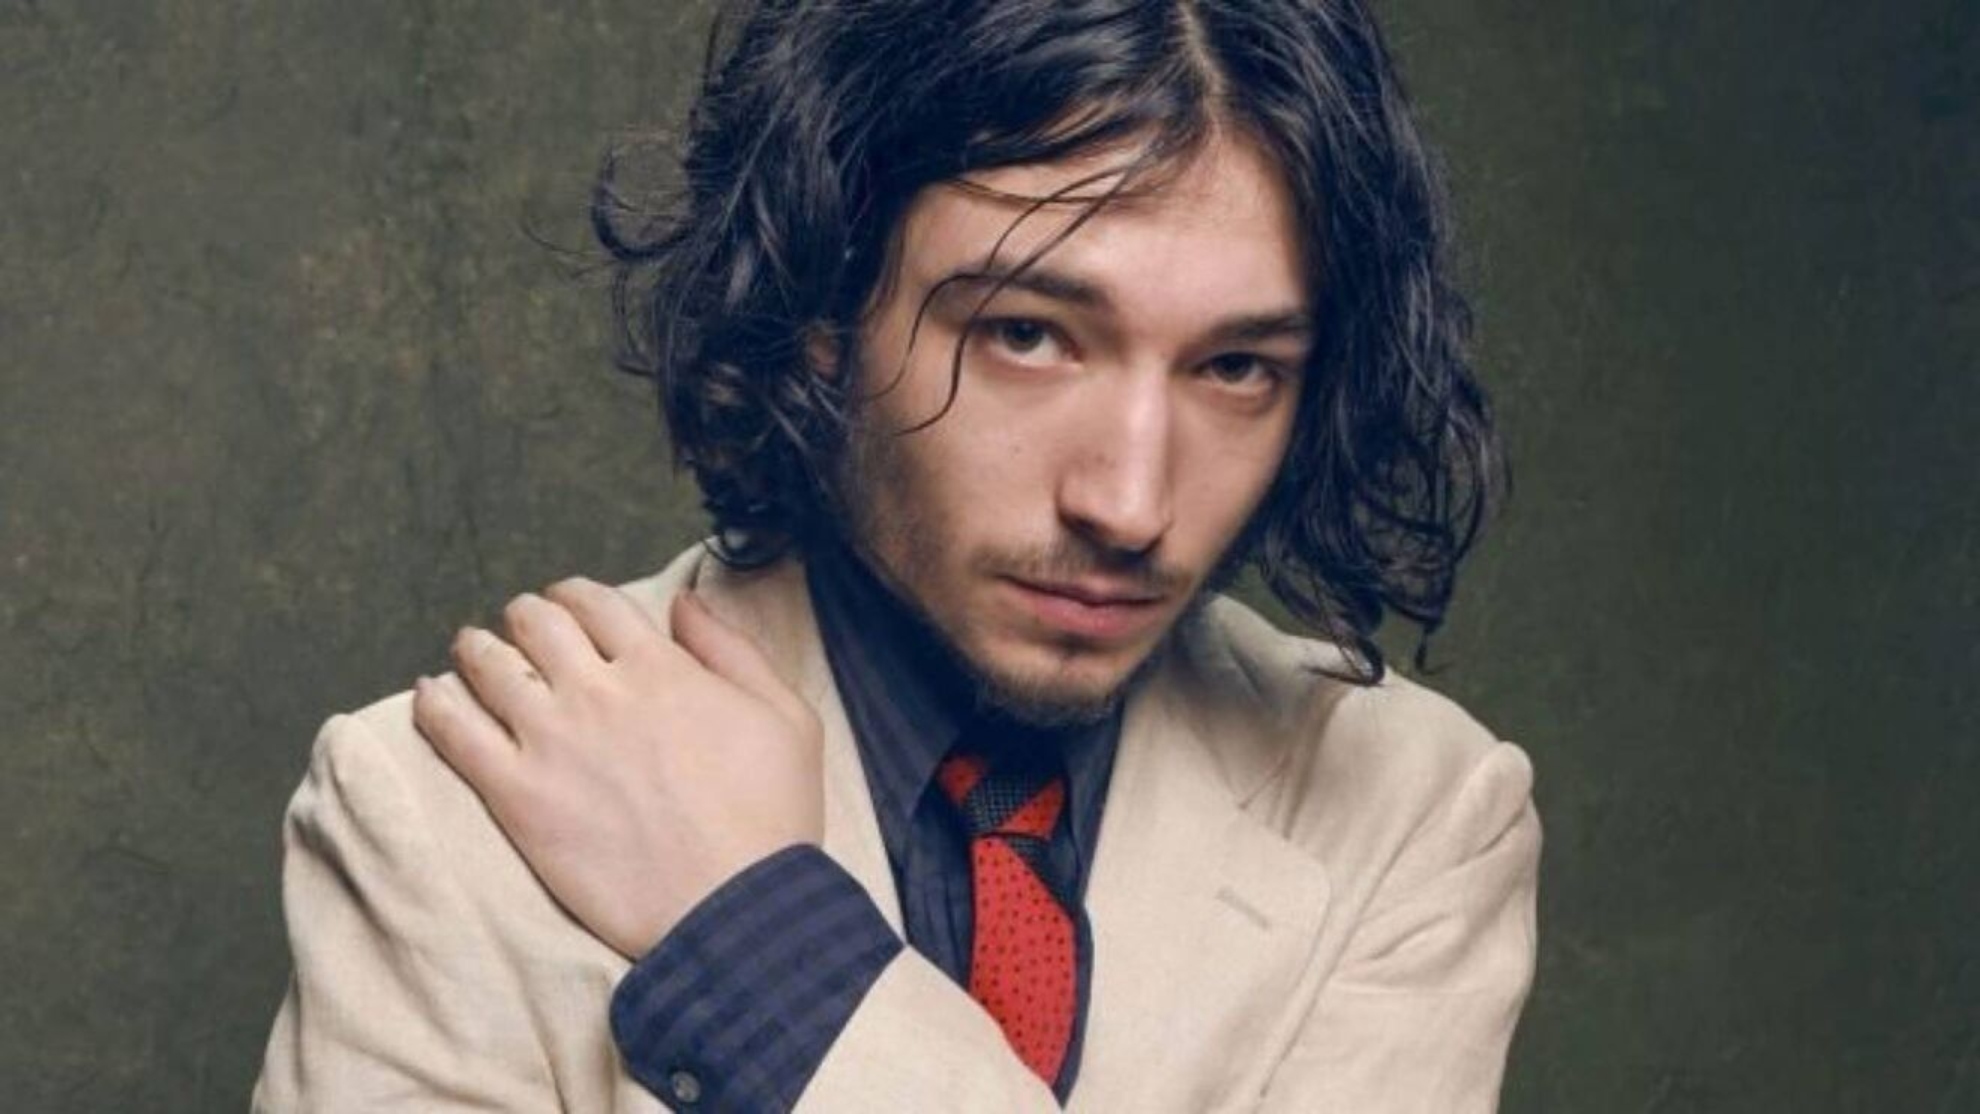 Is Ezra Miller fugitive? Authorities cannot locate or serve the actor